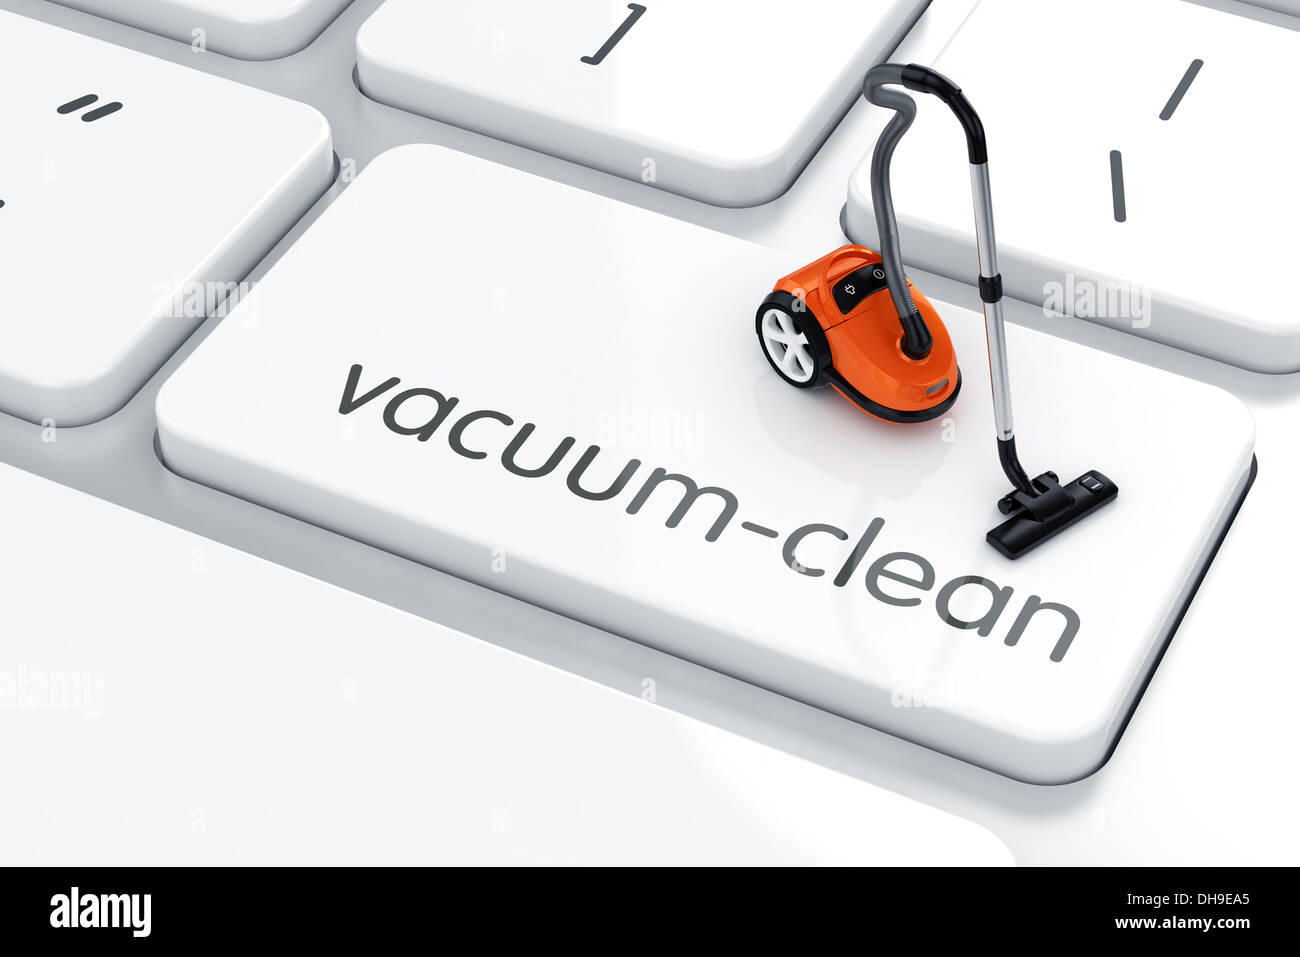 3d render of vacuum cleaner simbol icon on the keyboard. Vacuum-clean concept Stock Photo